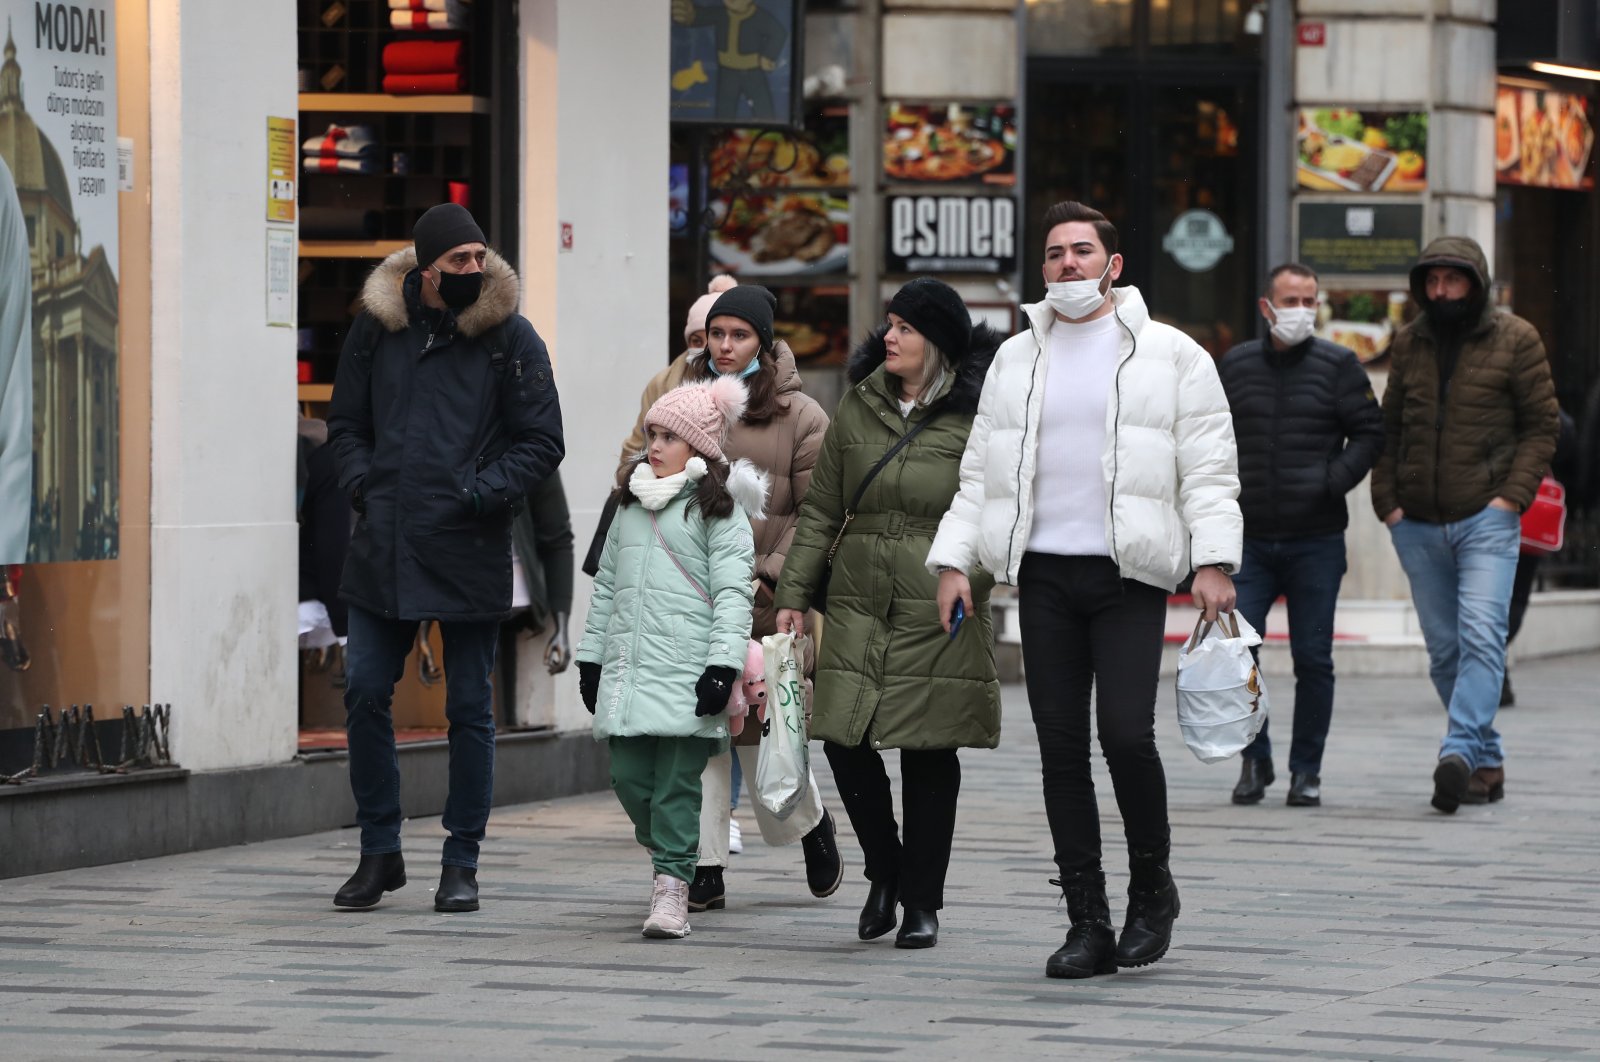 People with and without protective masks against COVID-19 walk on a street in Istanbul, Turkey, Jan. 14, 2022. (DHA PHOTO)